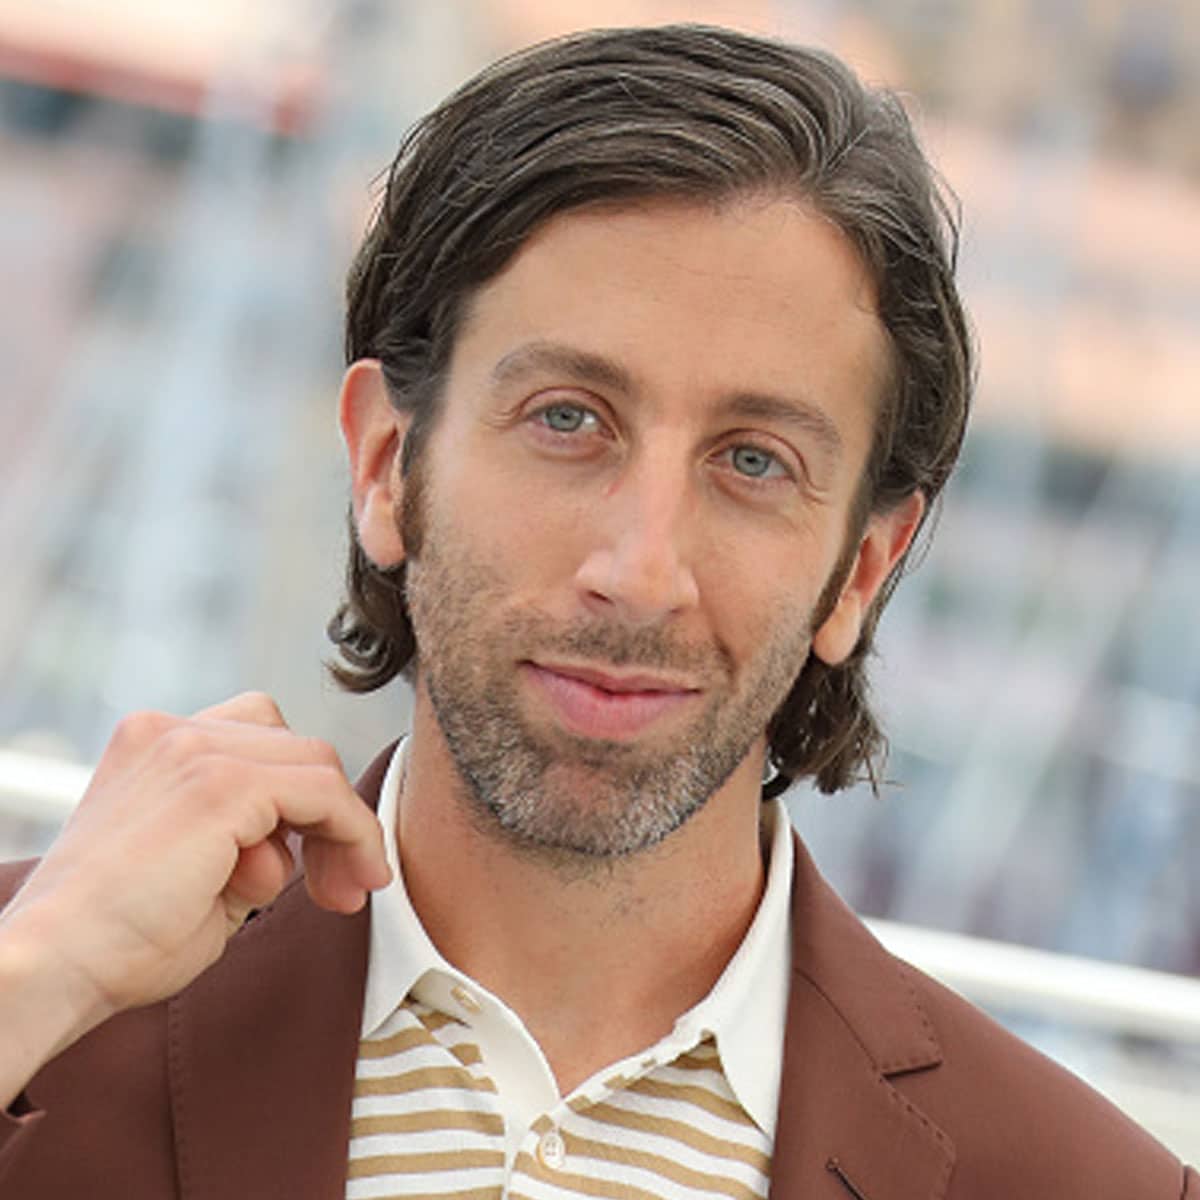 Simon Helberg attends the "Annette" photocall during the 74th annual Cannes Film Festival